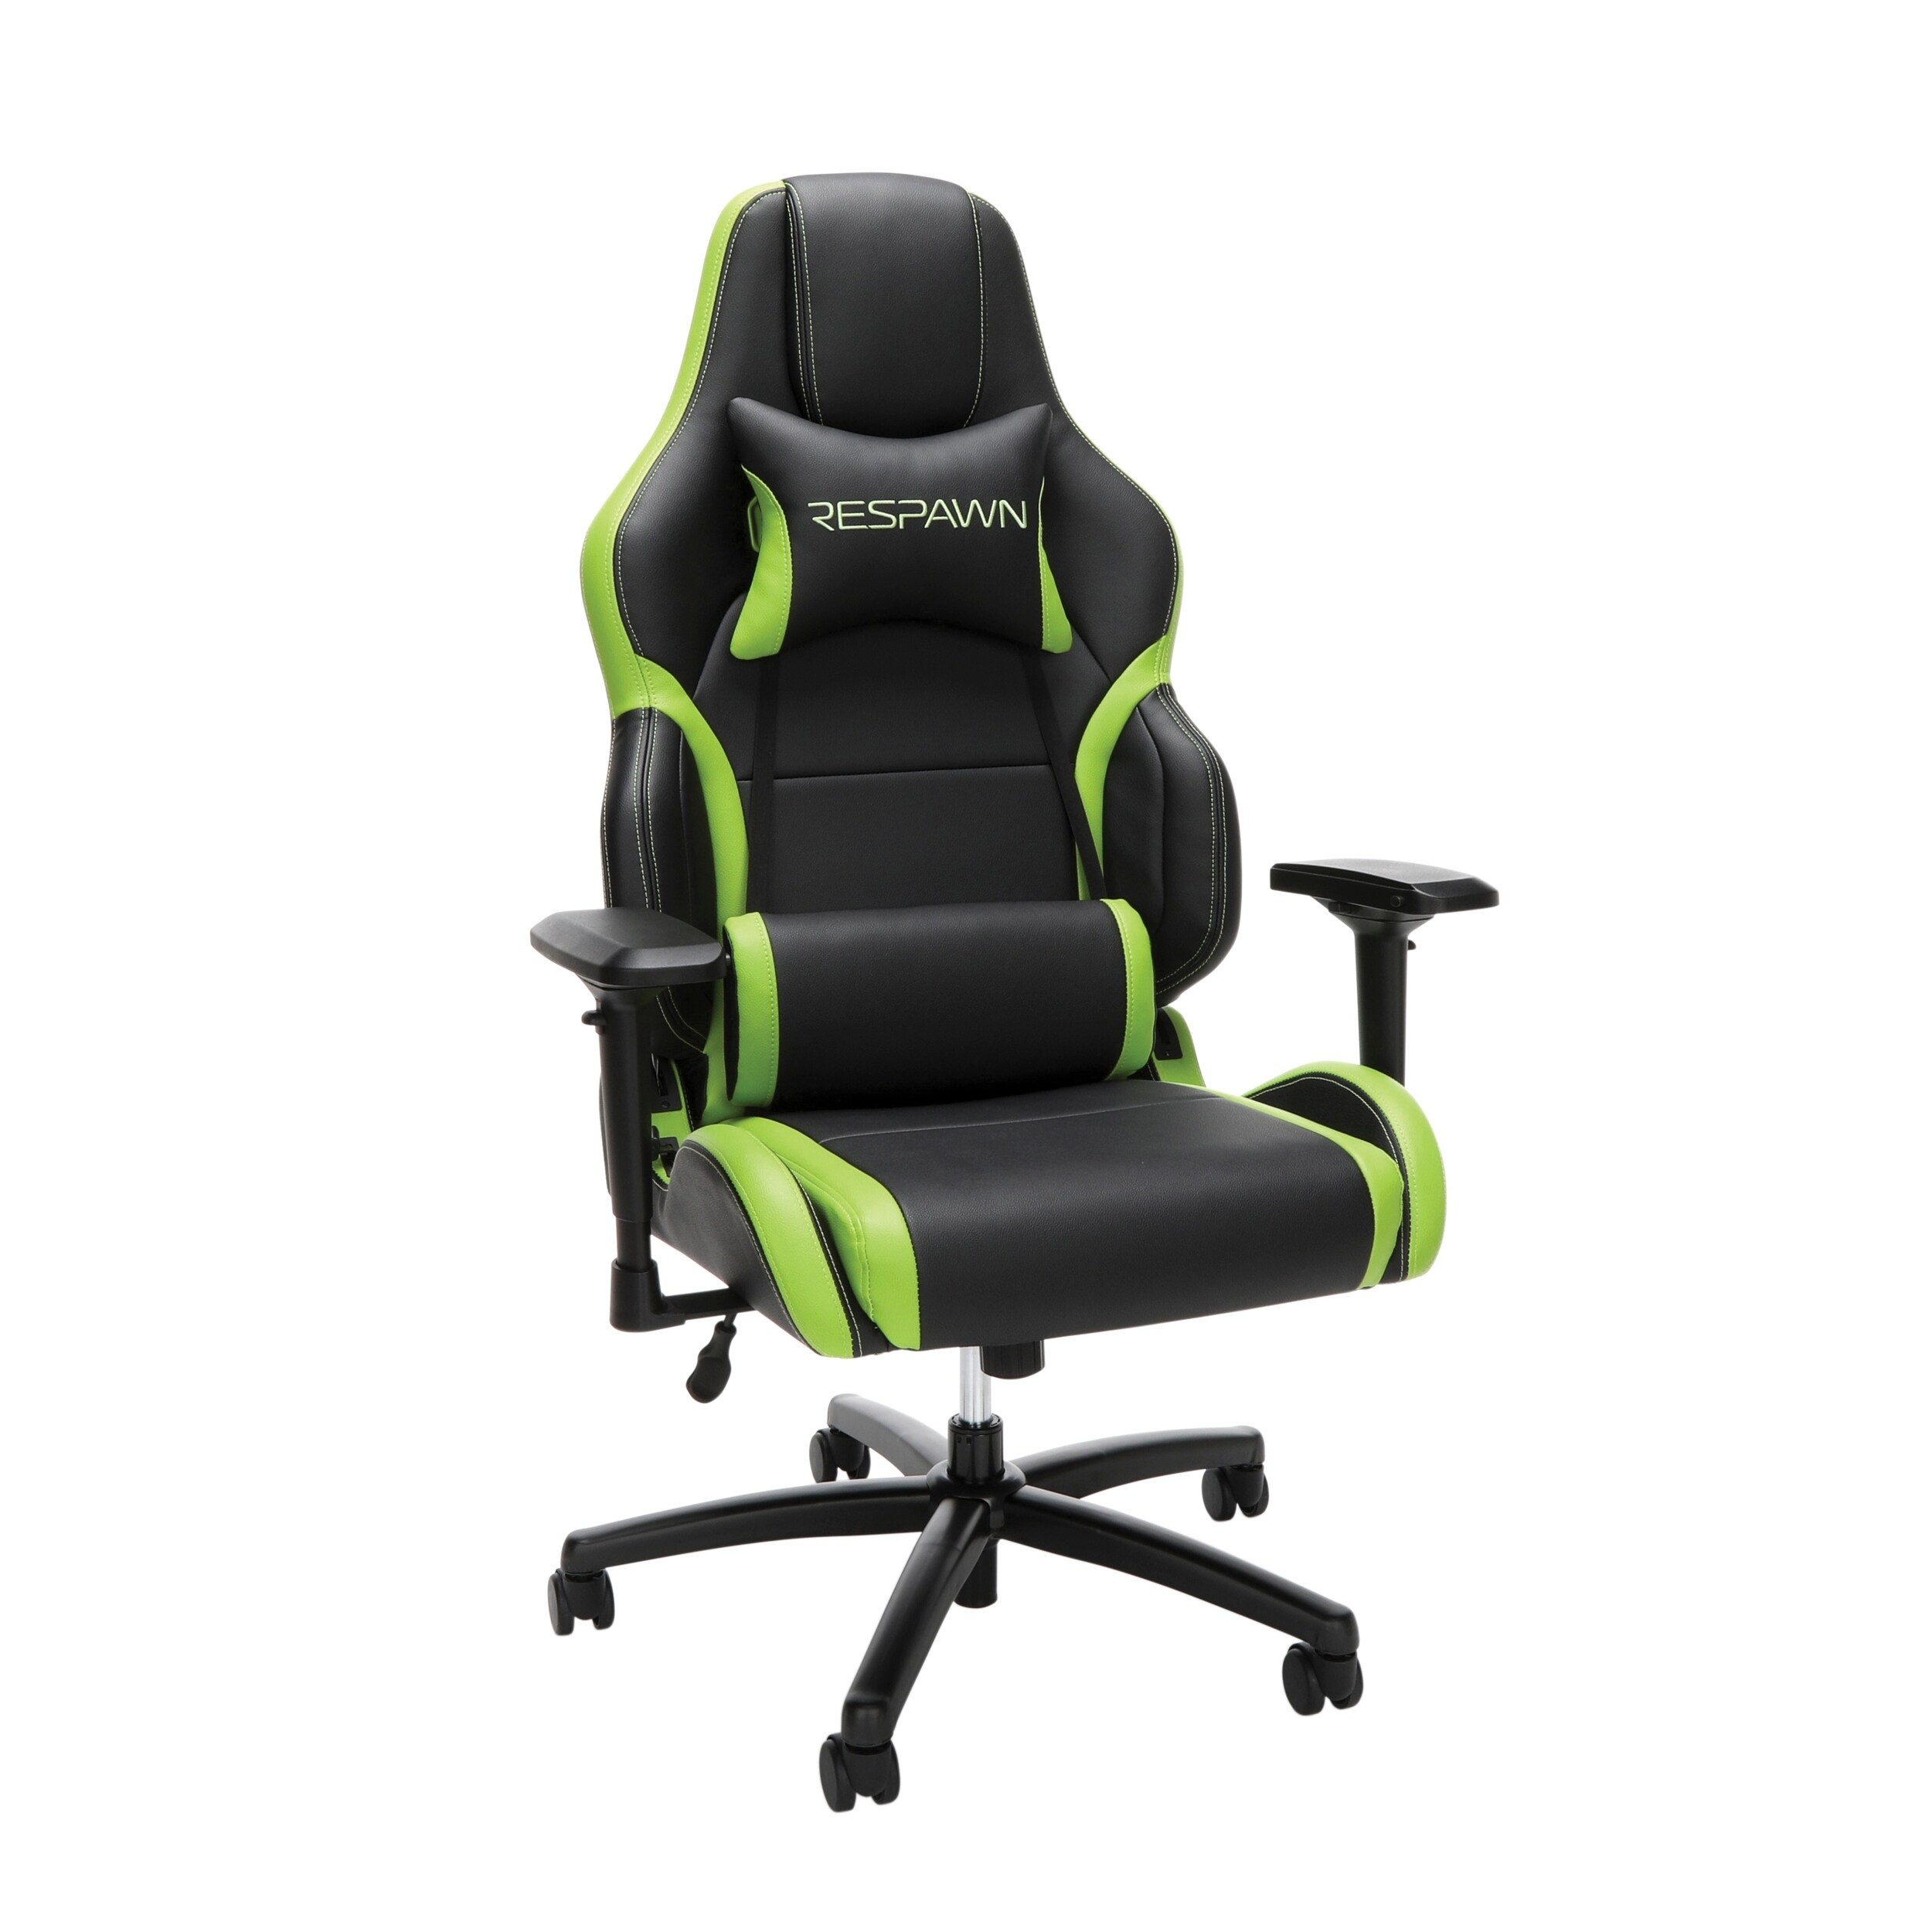 RESPAWN-400 Big and Tall Racing Style Leather Gaming Chair | eBay